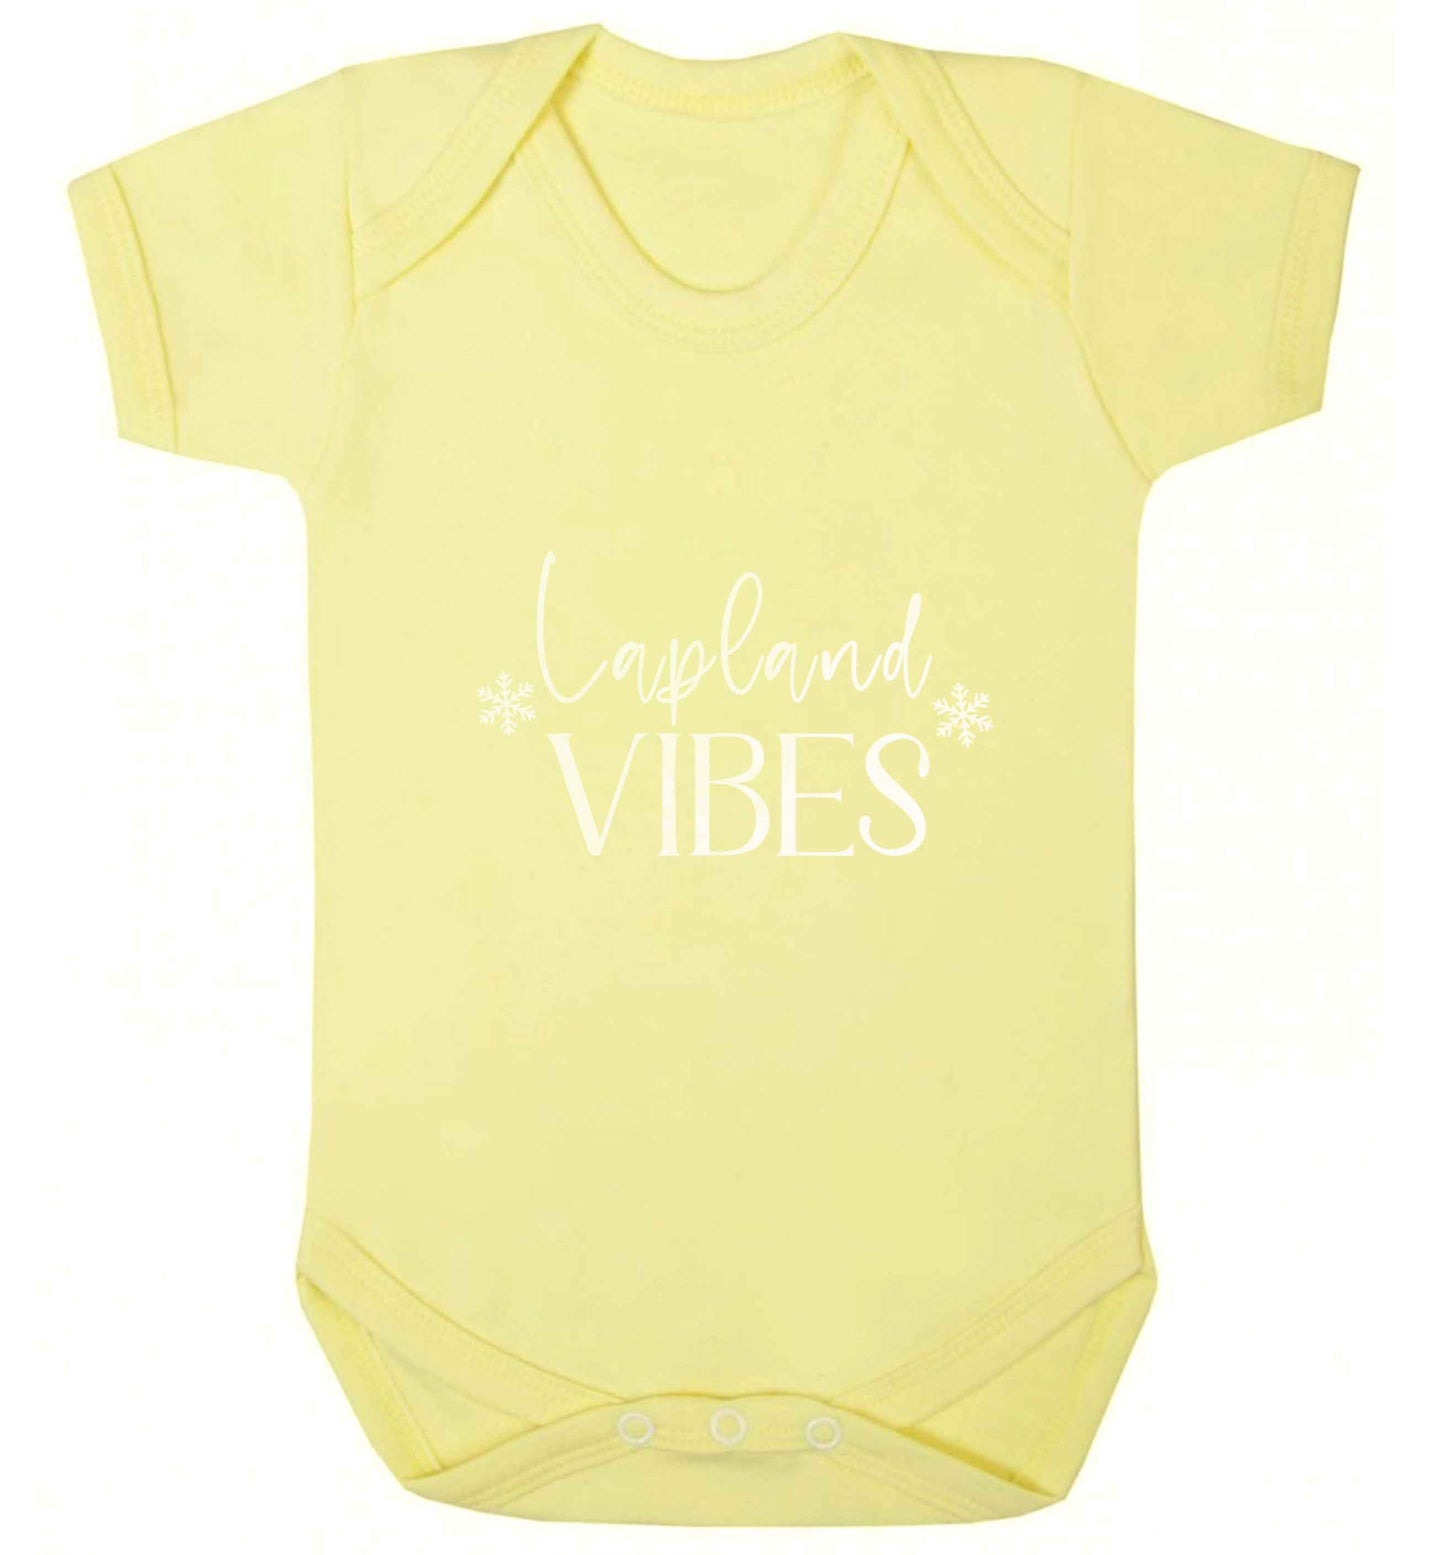 Lapland vibes baby vest pale yellow 18-24 months